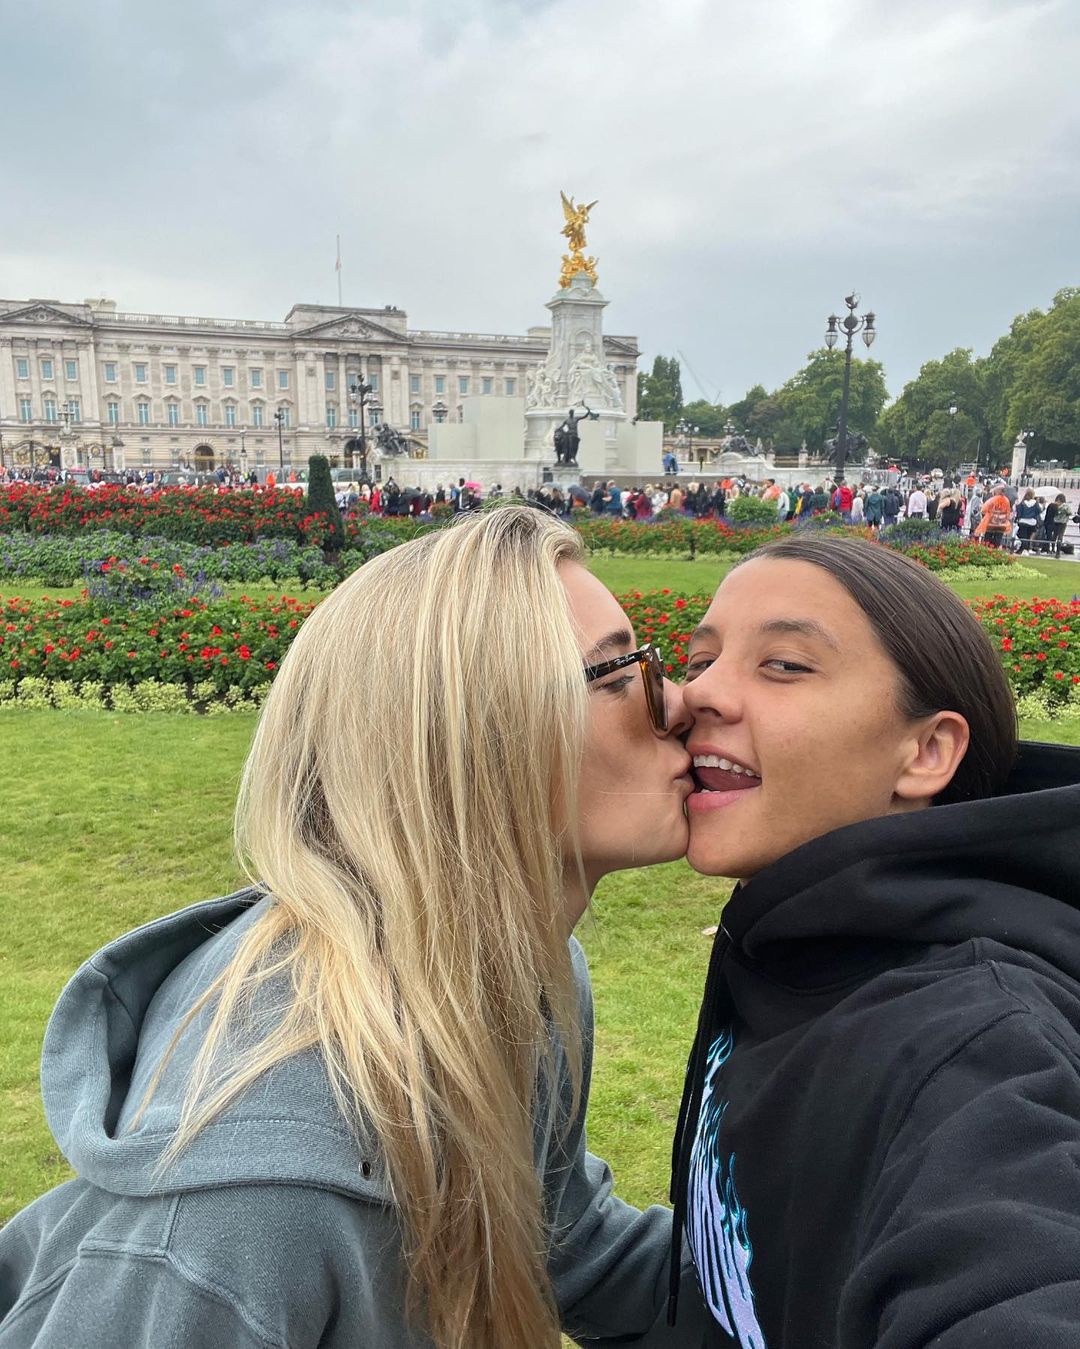 Are Kristie Mewis and Sam Kerr dating?